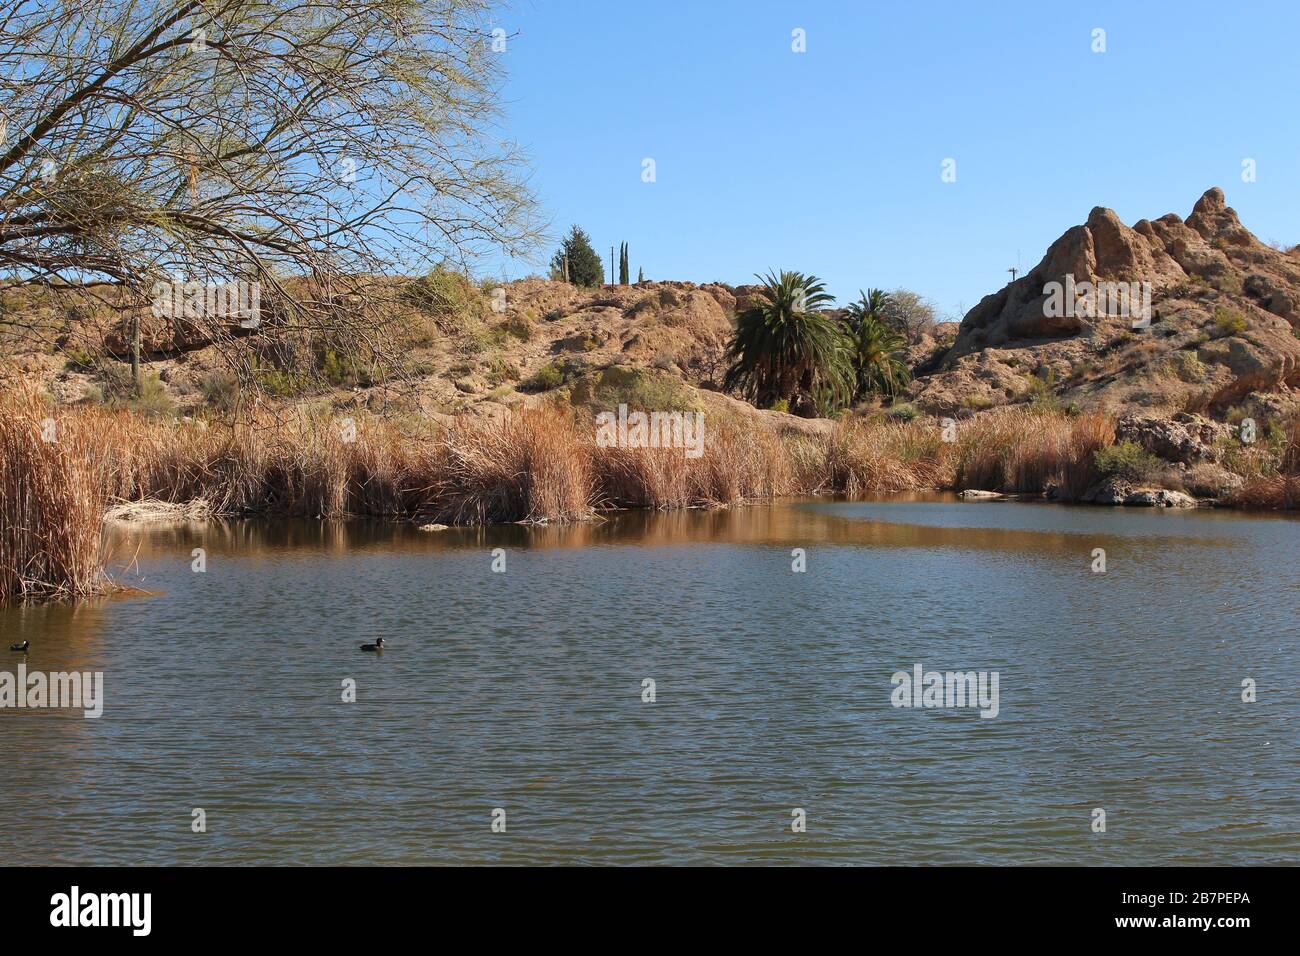 An oasis with American Coots floating in the water in the Sonoran Desert of Superior, Arizona, USA Stock Photo